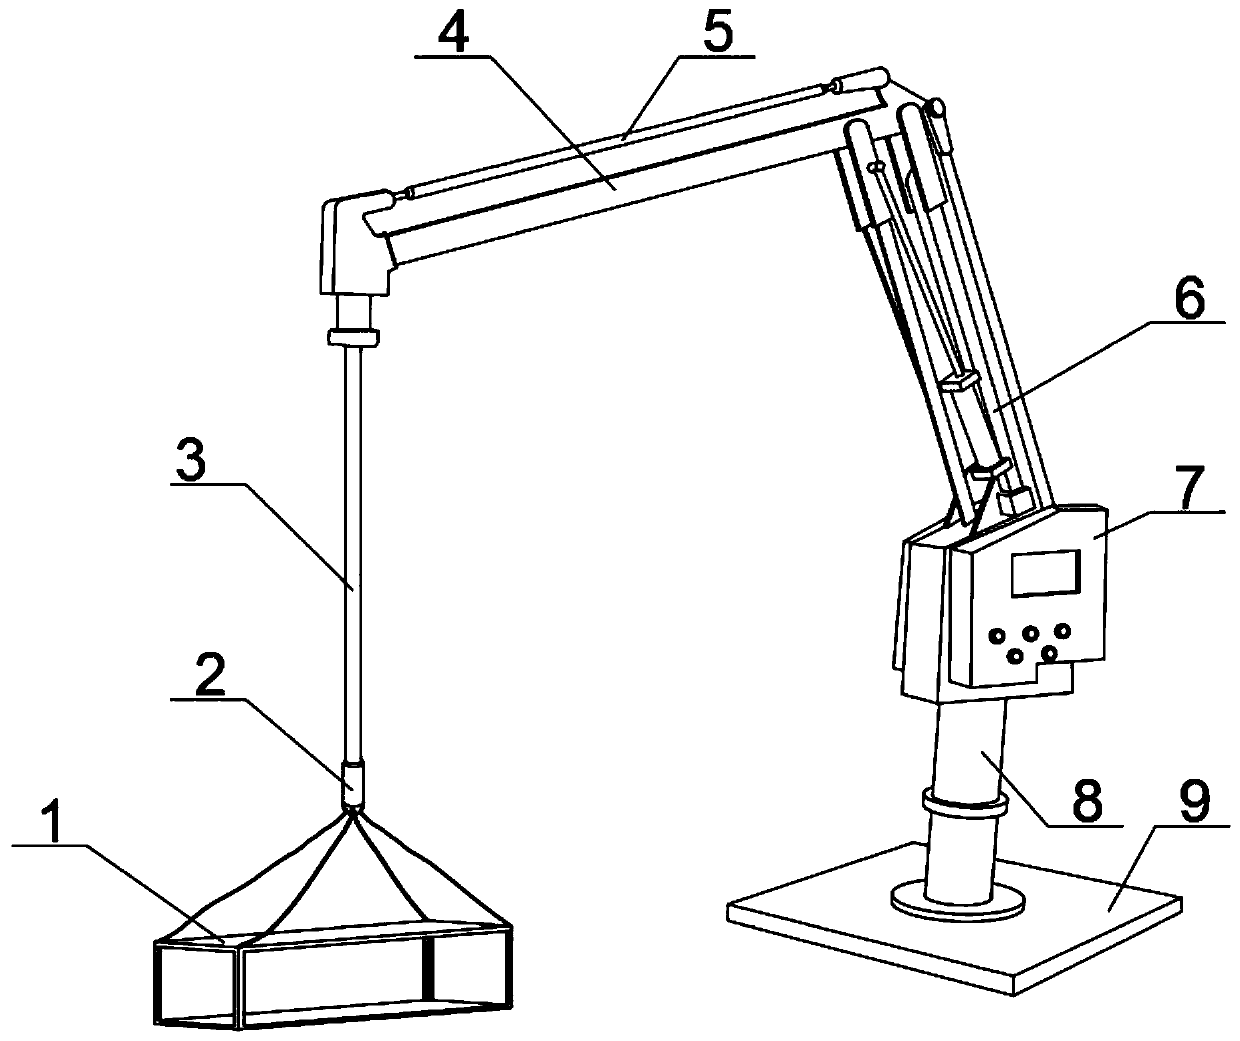 Board material hoisting device used for house building construction